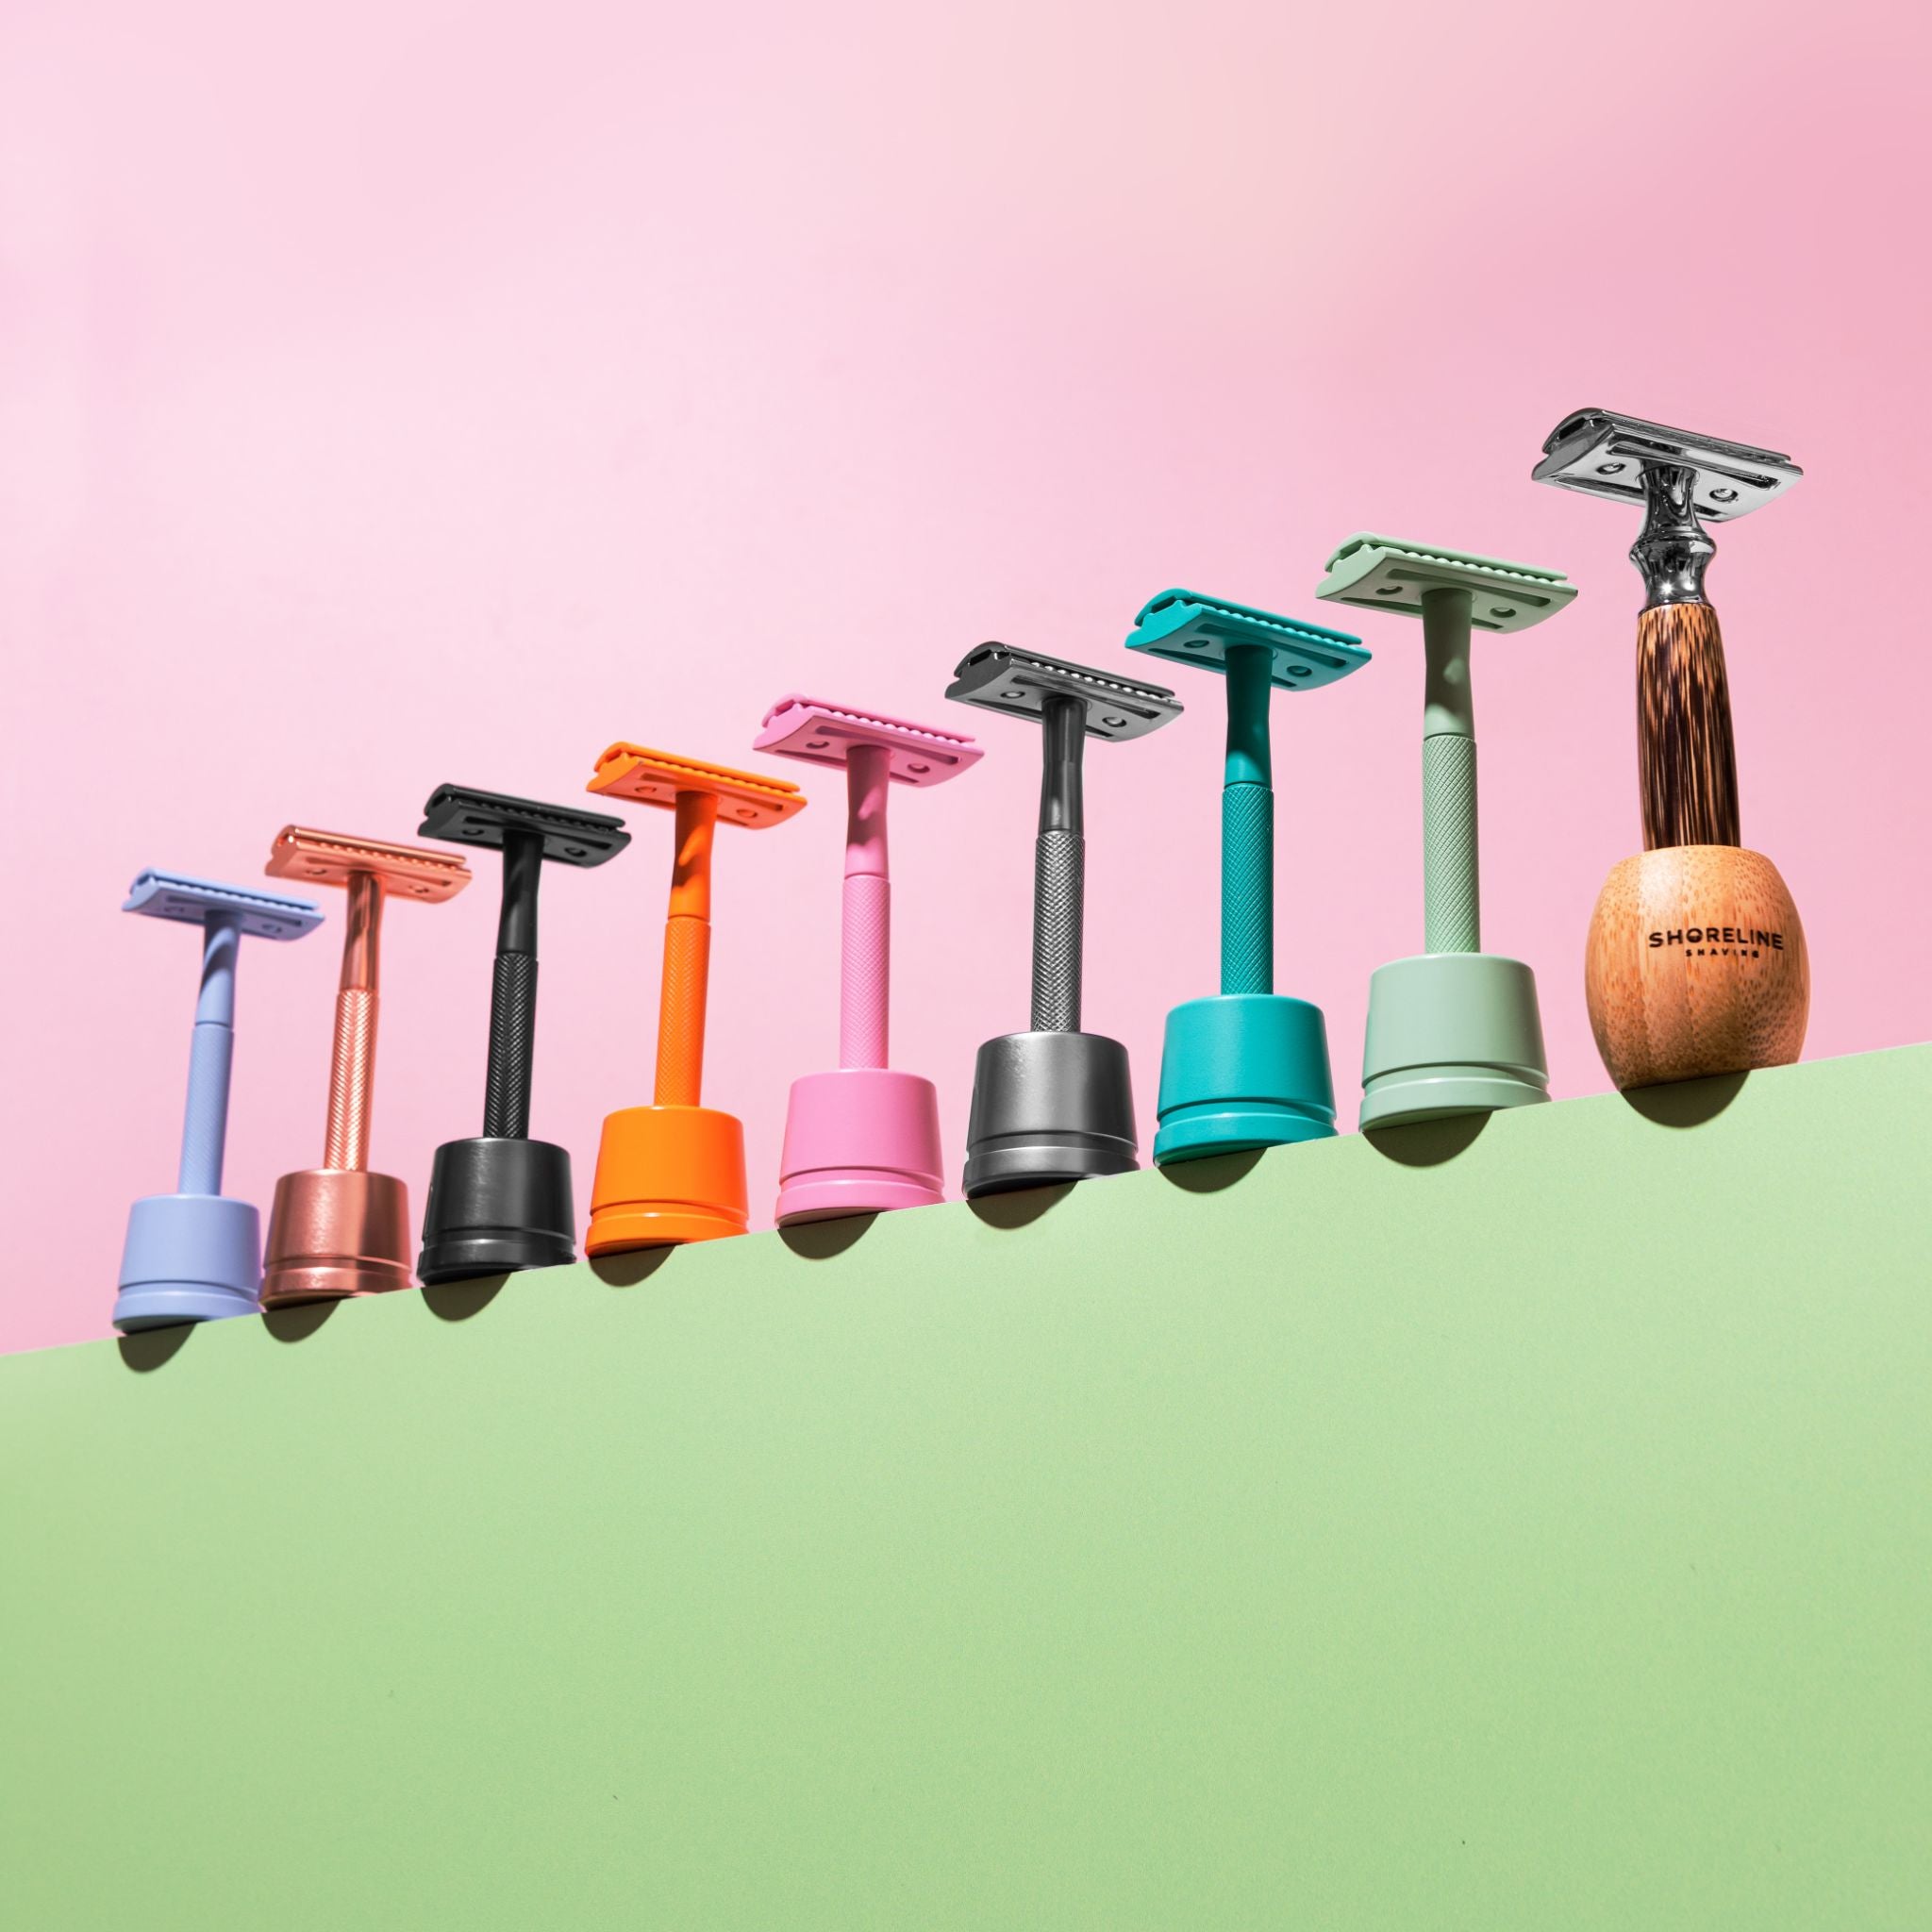 A wide range of safety razors and matching stands in different colours, from the ultimate shaving kit gift set - Shoreline Shaving